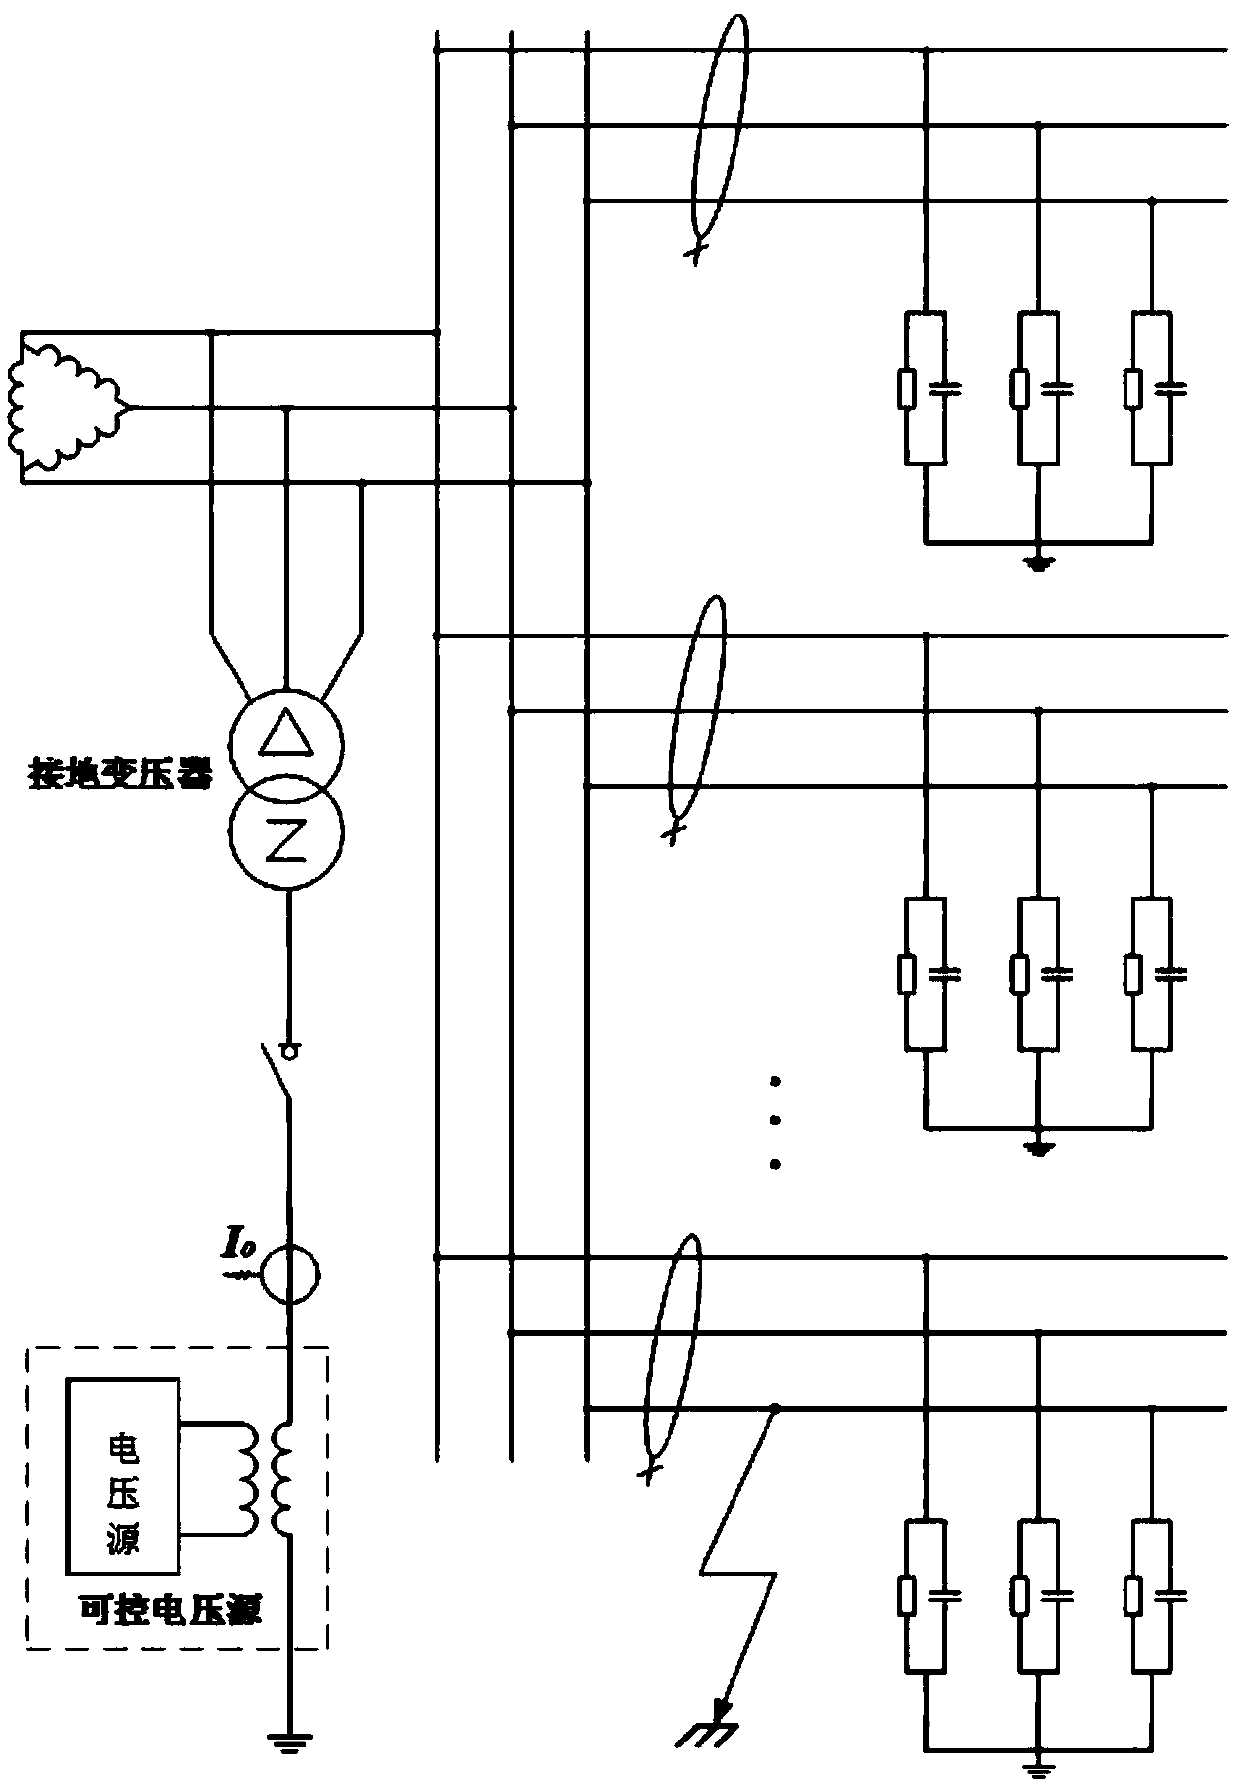 Grounding fault current control method and device